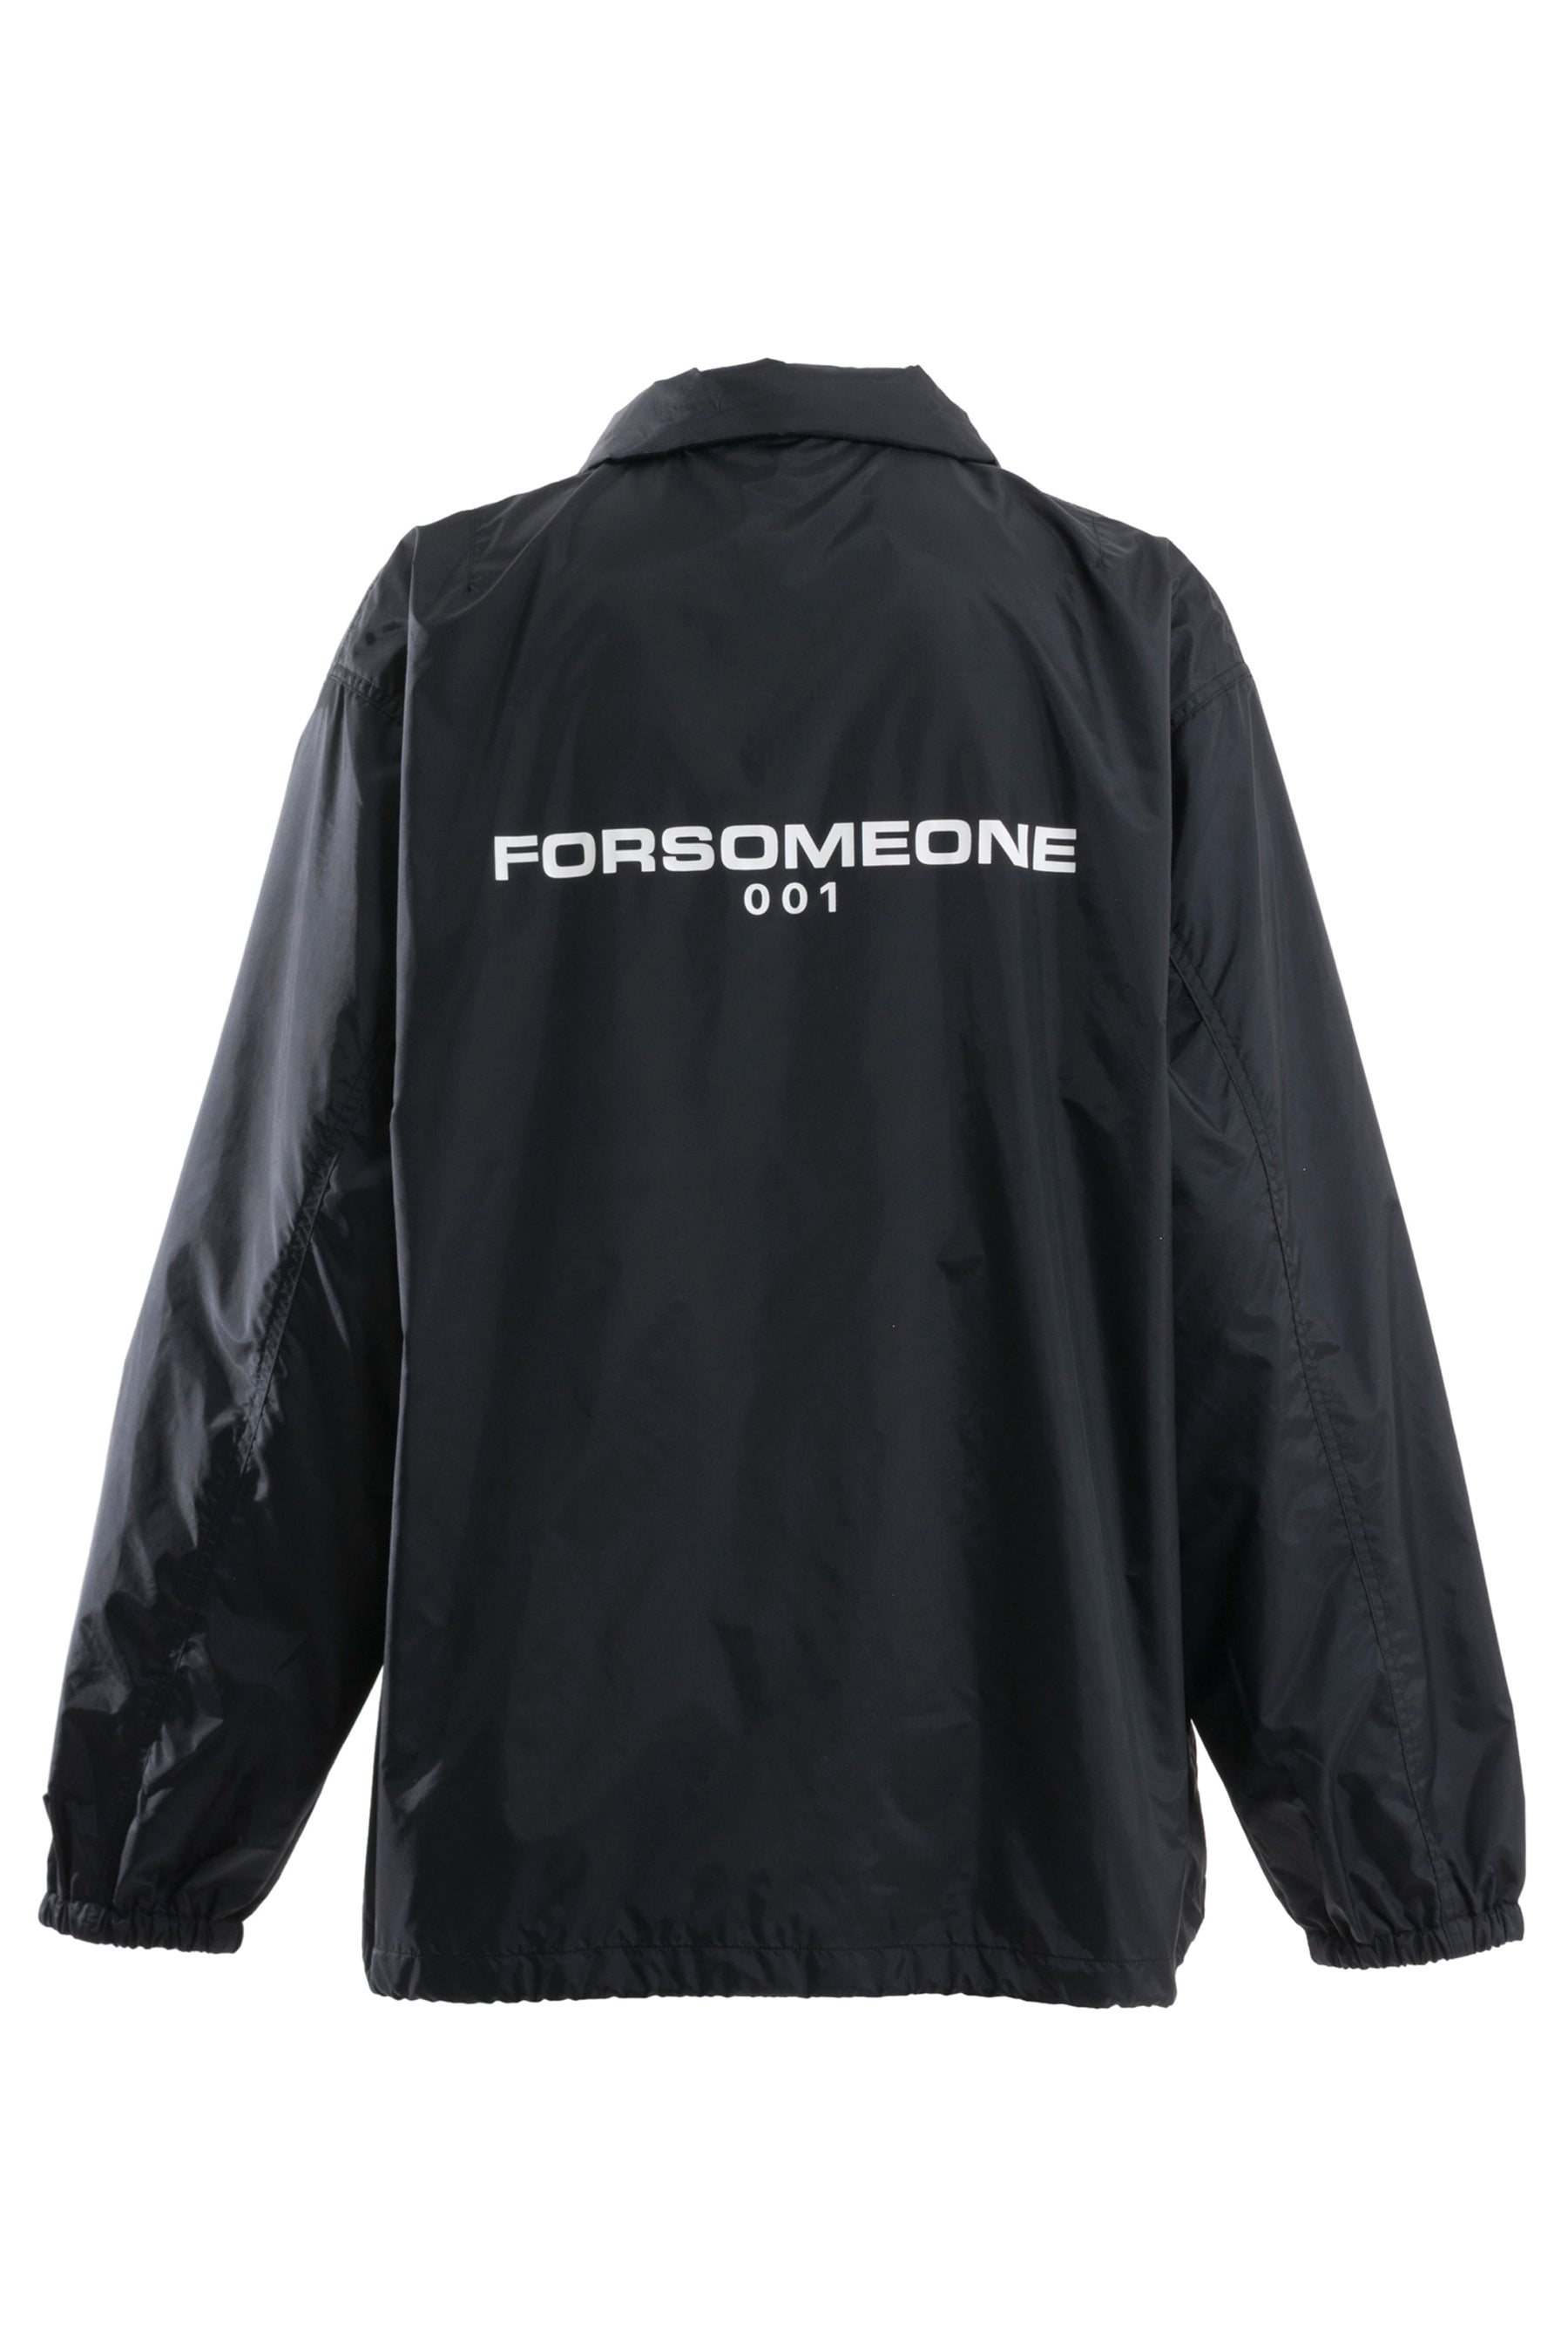 FORSOMEONE フォーサムワン SS23 FSO COACH JACKET BLK NUBIAN